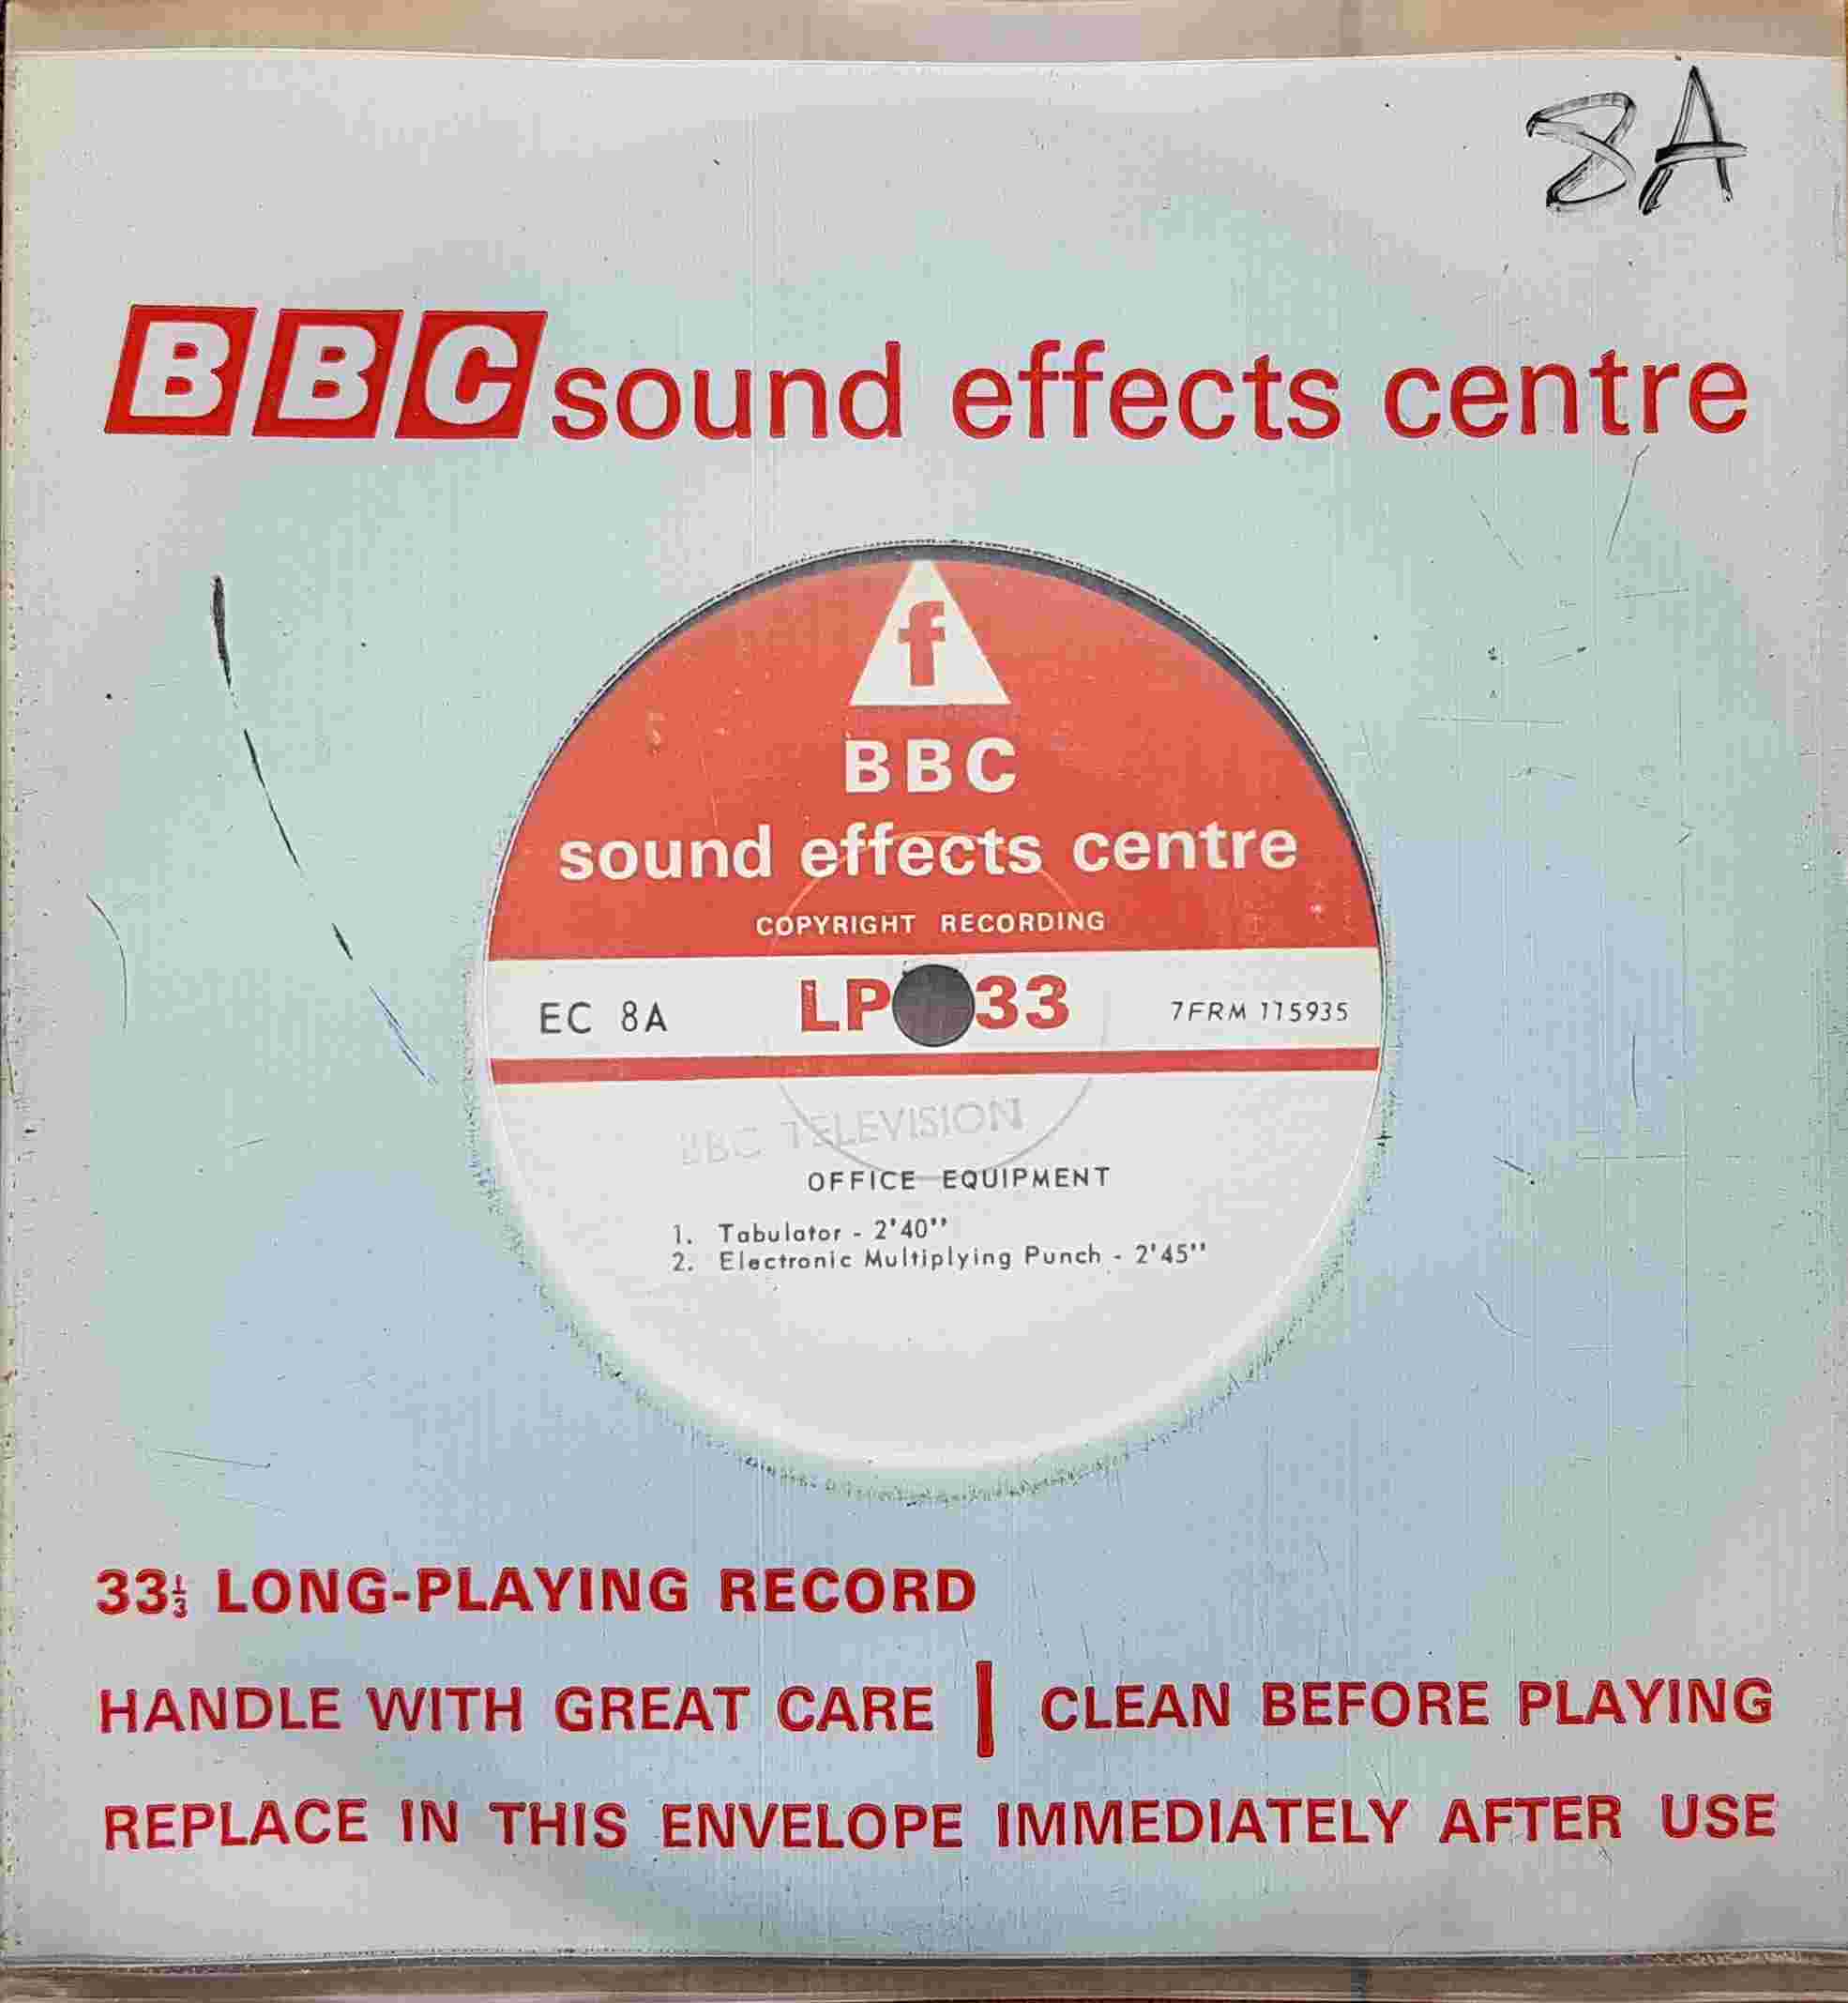 Picture of EC 8A Office equipment by artist Not registered from the BBC records and Tapes library